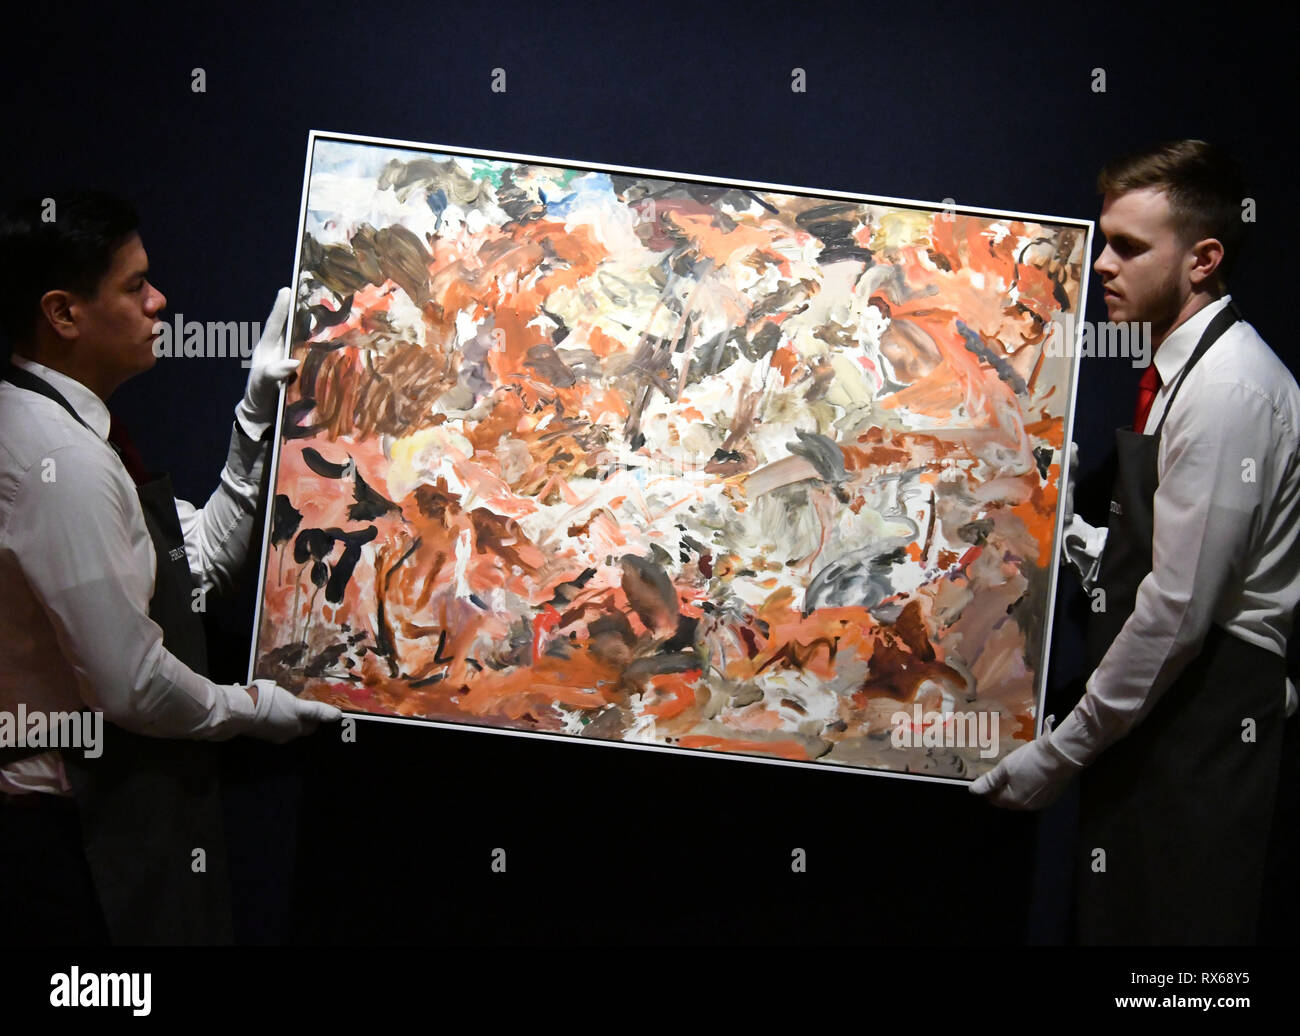 PLEASE NOTE ALL IMAGES UNDER EMBARGO UNTIL FRIDAY 8 MARCH AT 23:00. London, UK. 8th Mar 2019.  Cecily Brown, Yet to be titled, Estimate £350,000 - 550,000 at Christie’s exhibition of art from the collection of the late George Michael, featuring works by Damien Hirst, Tracey Emin and Marc Quinn, from its upcoming The George Michael Collection Evening and Online Auctions, on view to the public from 9-15 March 2019. Credit: Nils Jorgensen/Alamy Live News Stock Photo